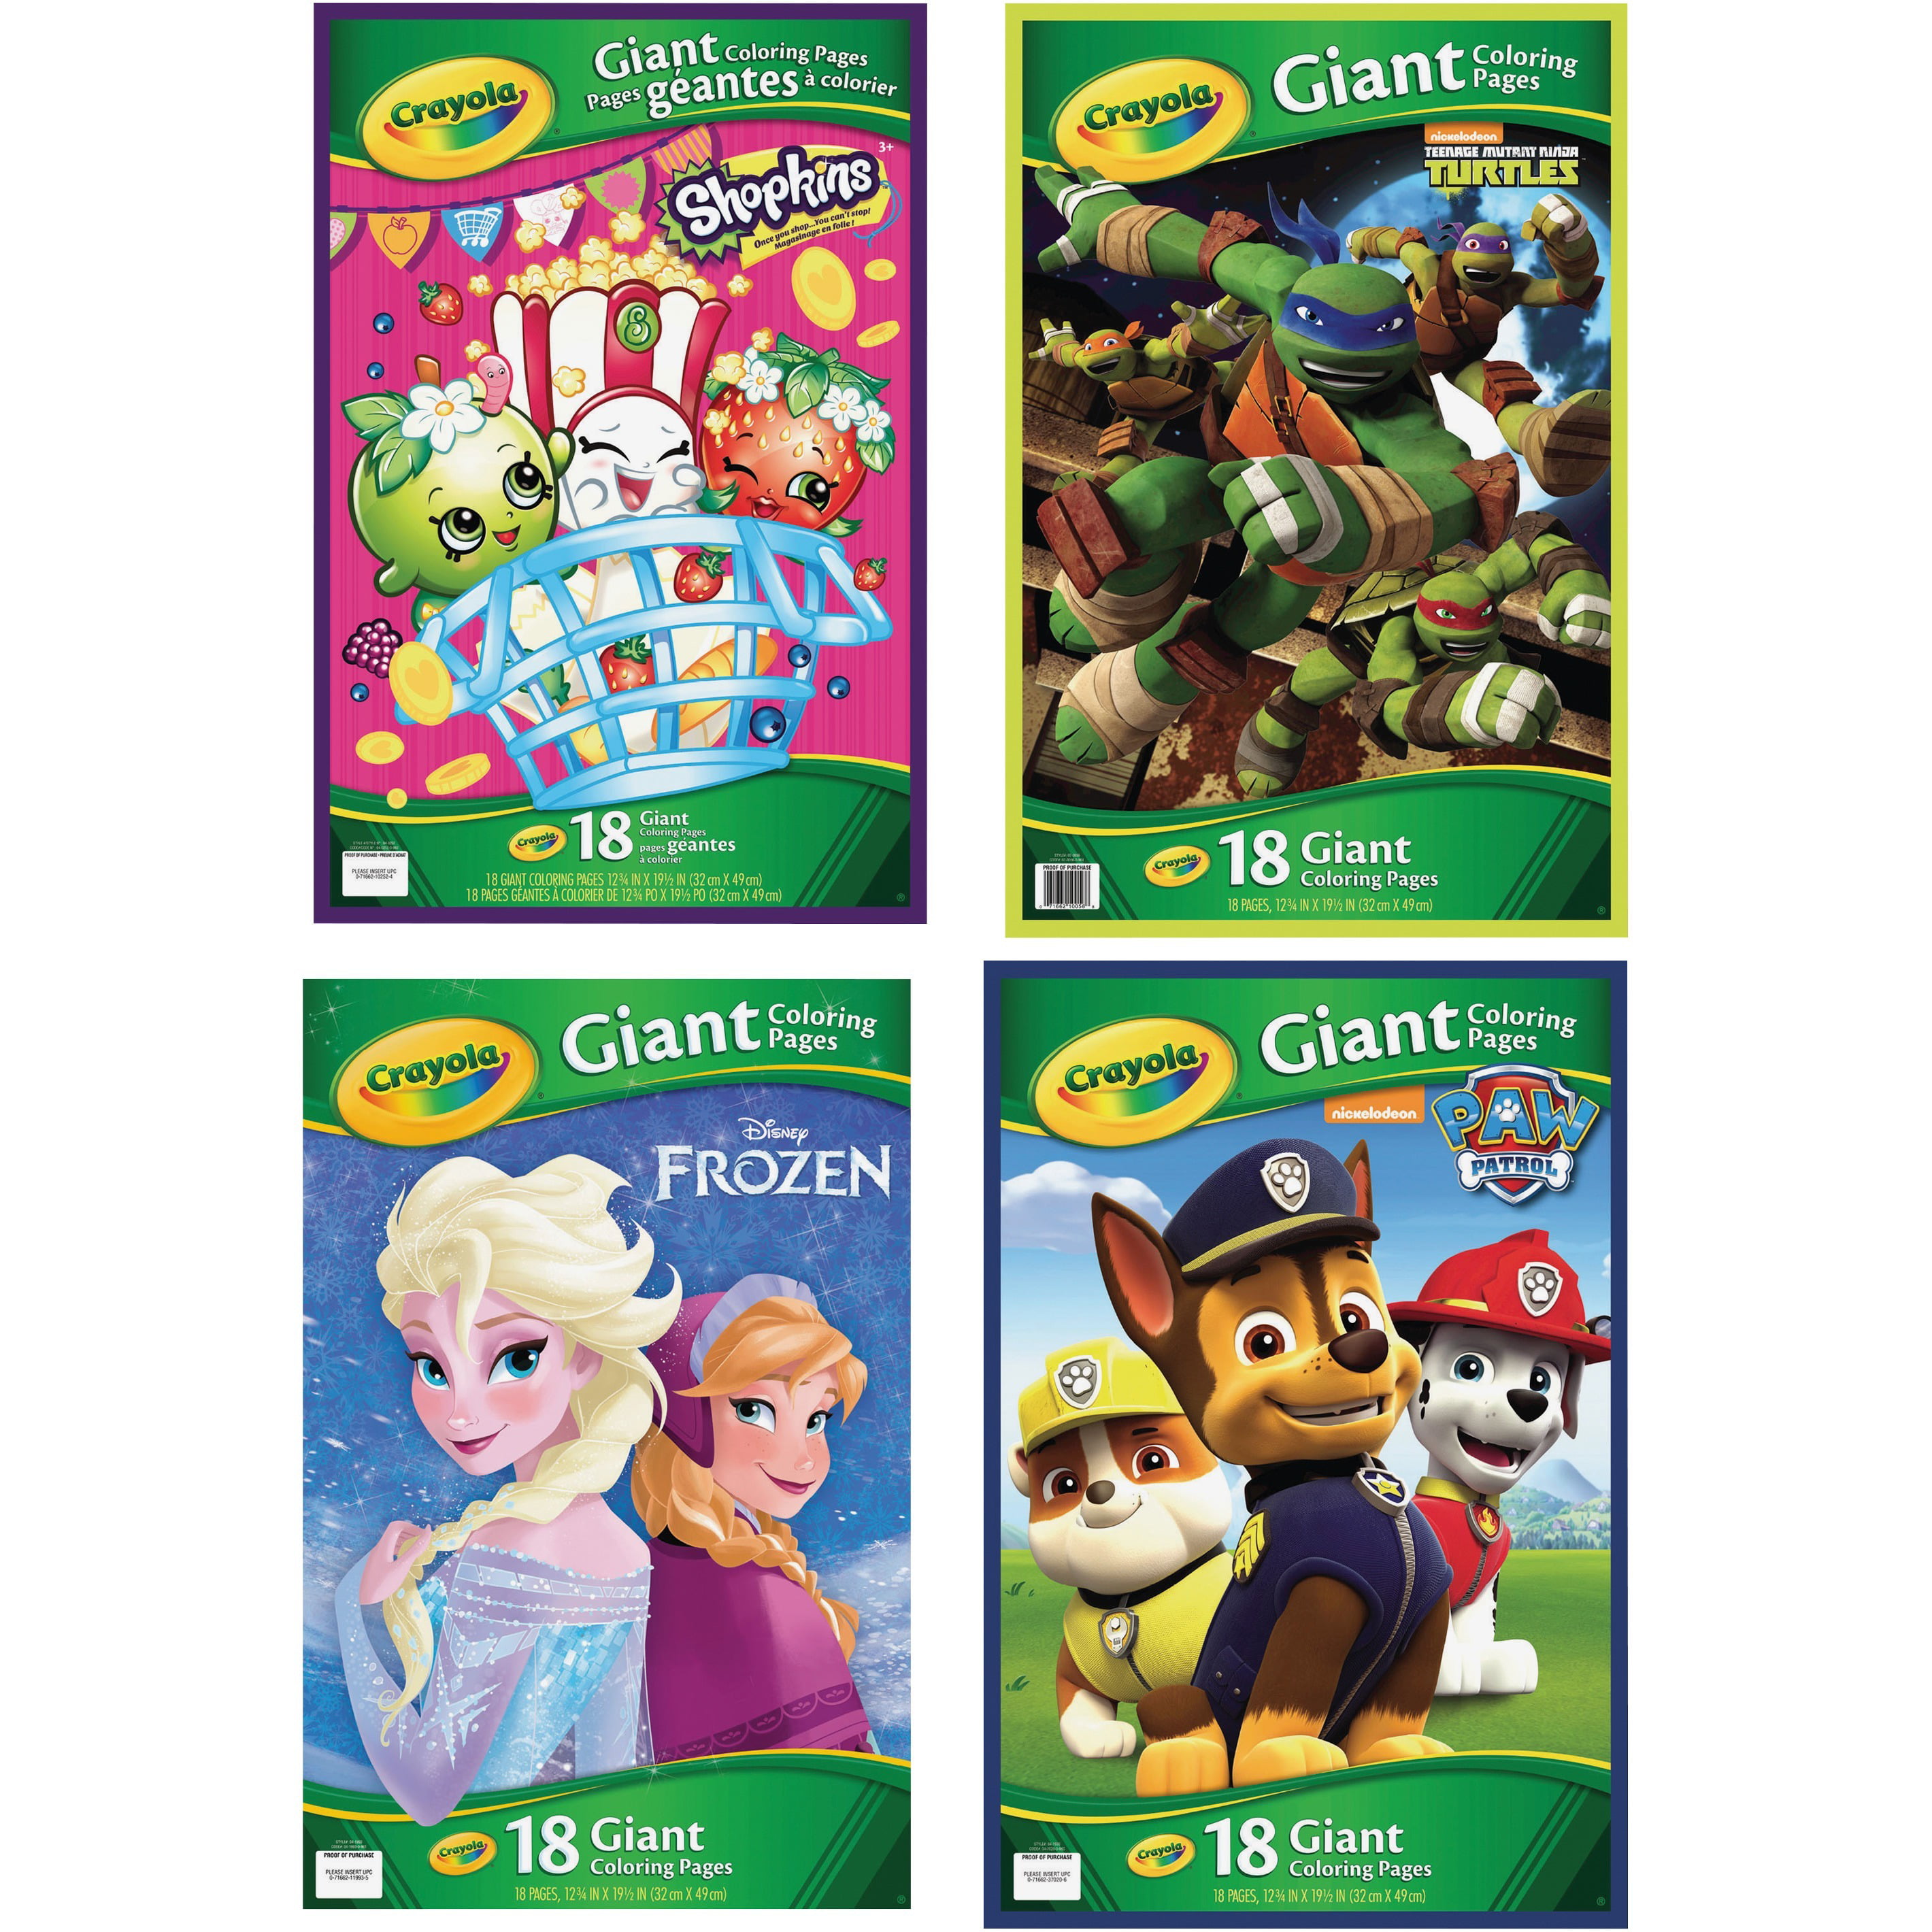 Crayola Giant Coloring Pages Assortment, 24 Count - Walmart.com